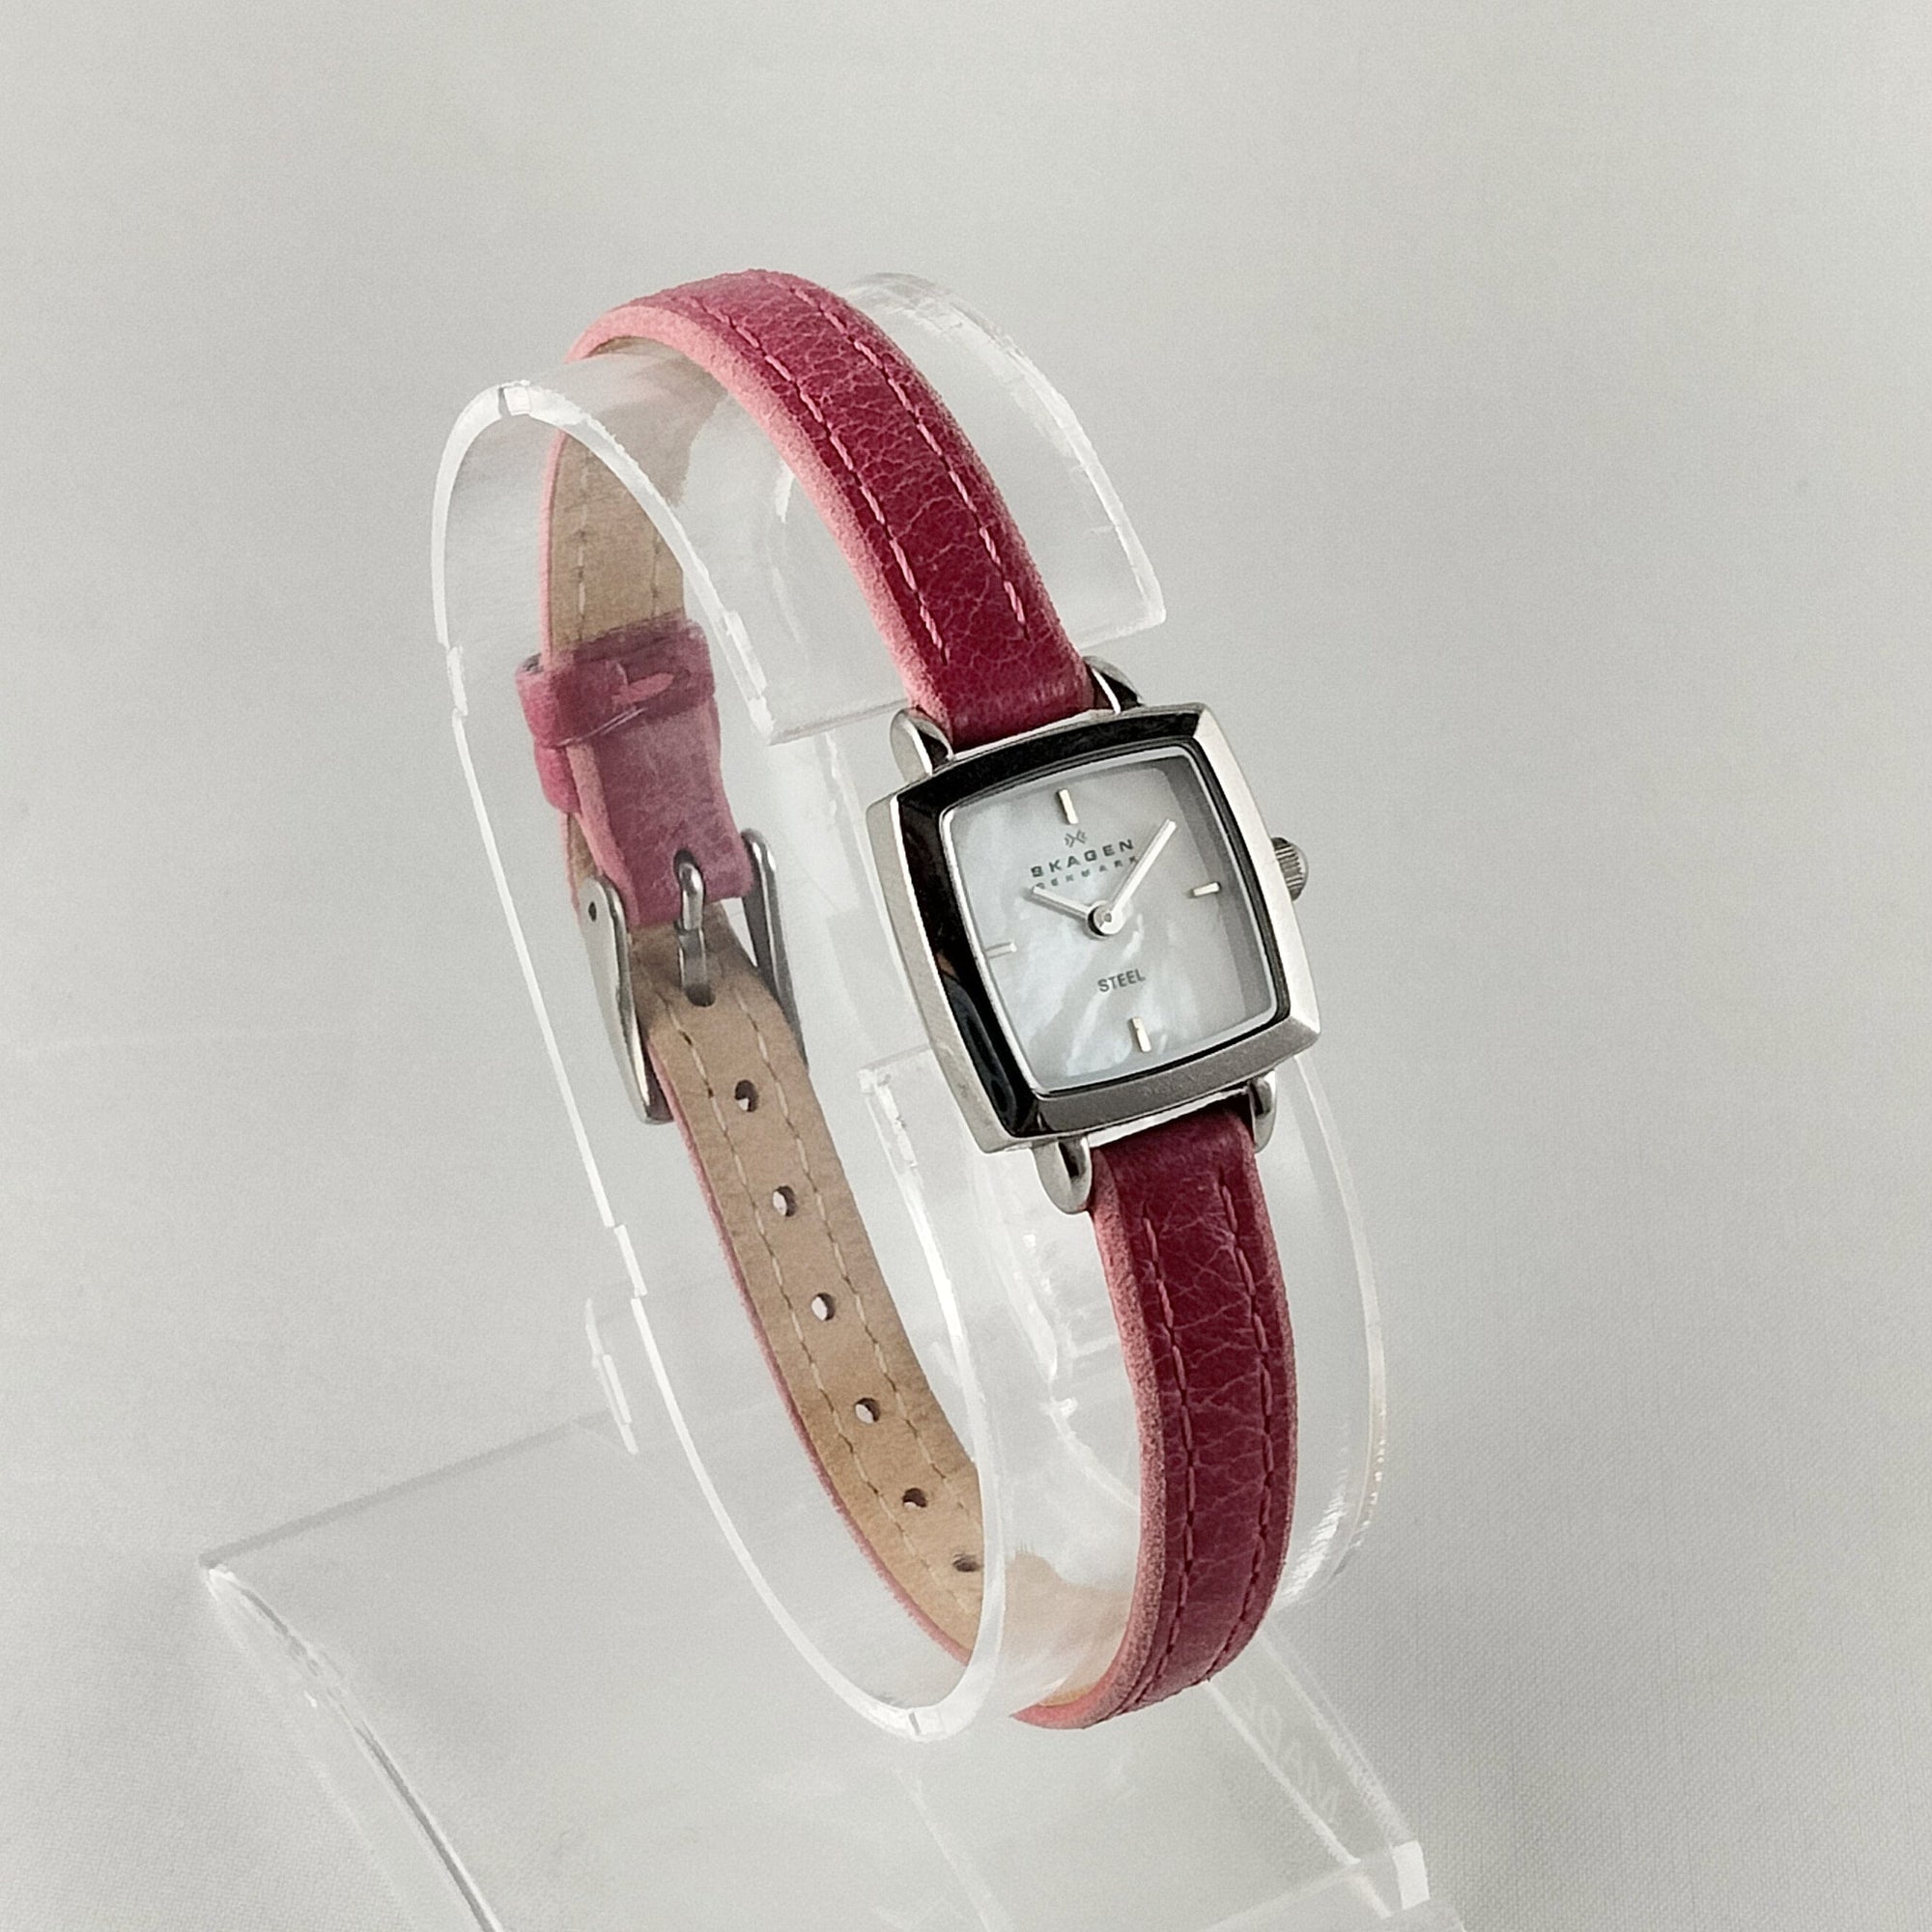 I Like Mikes Mid Century Modern Watches Skagen Women's Stainless Steel Watch, Tiny Square Mother of Pearl Dial, Thin Pink Genuine Leather Strap